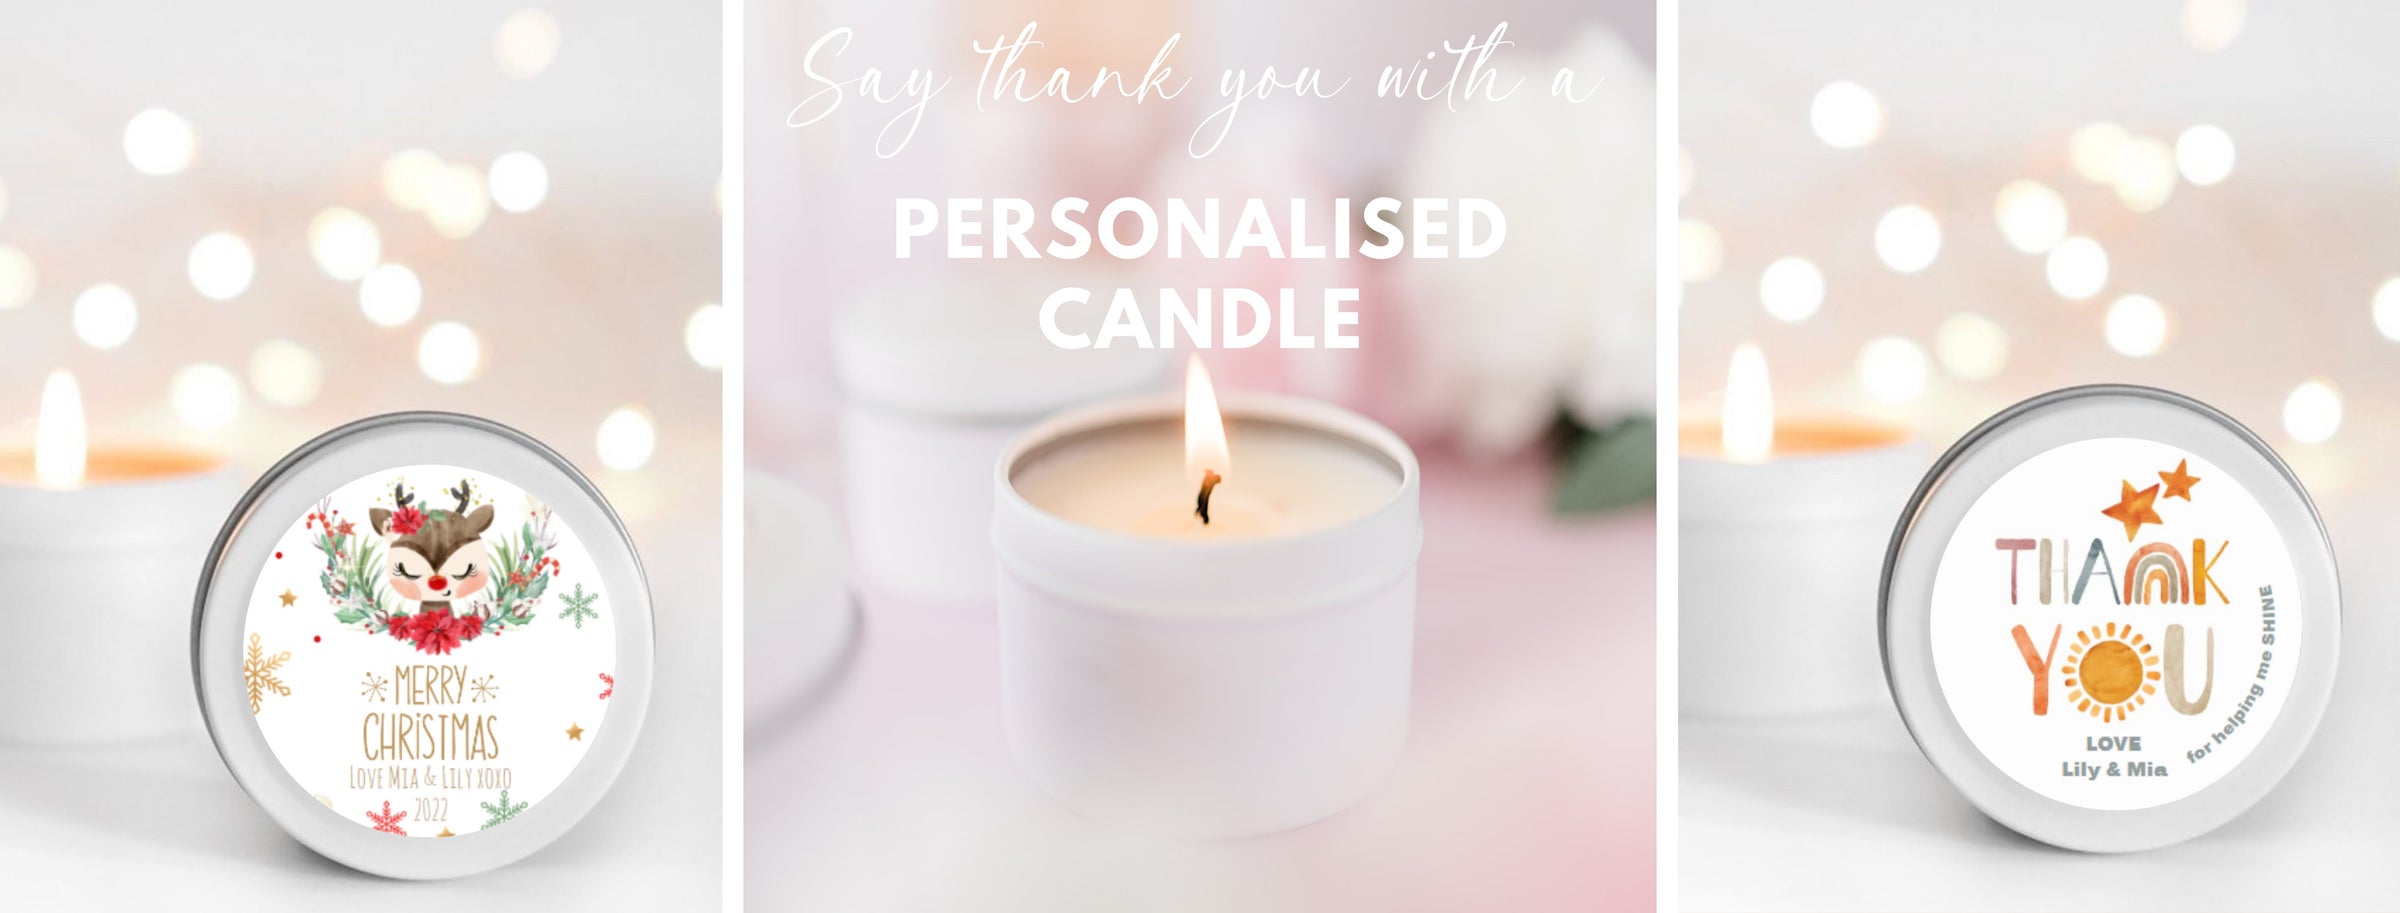 Christmas Gifts - Personalised Candle